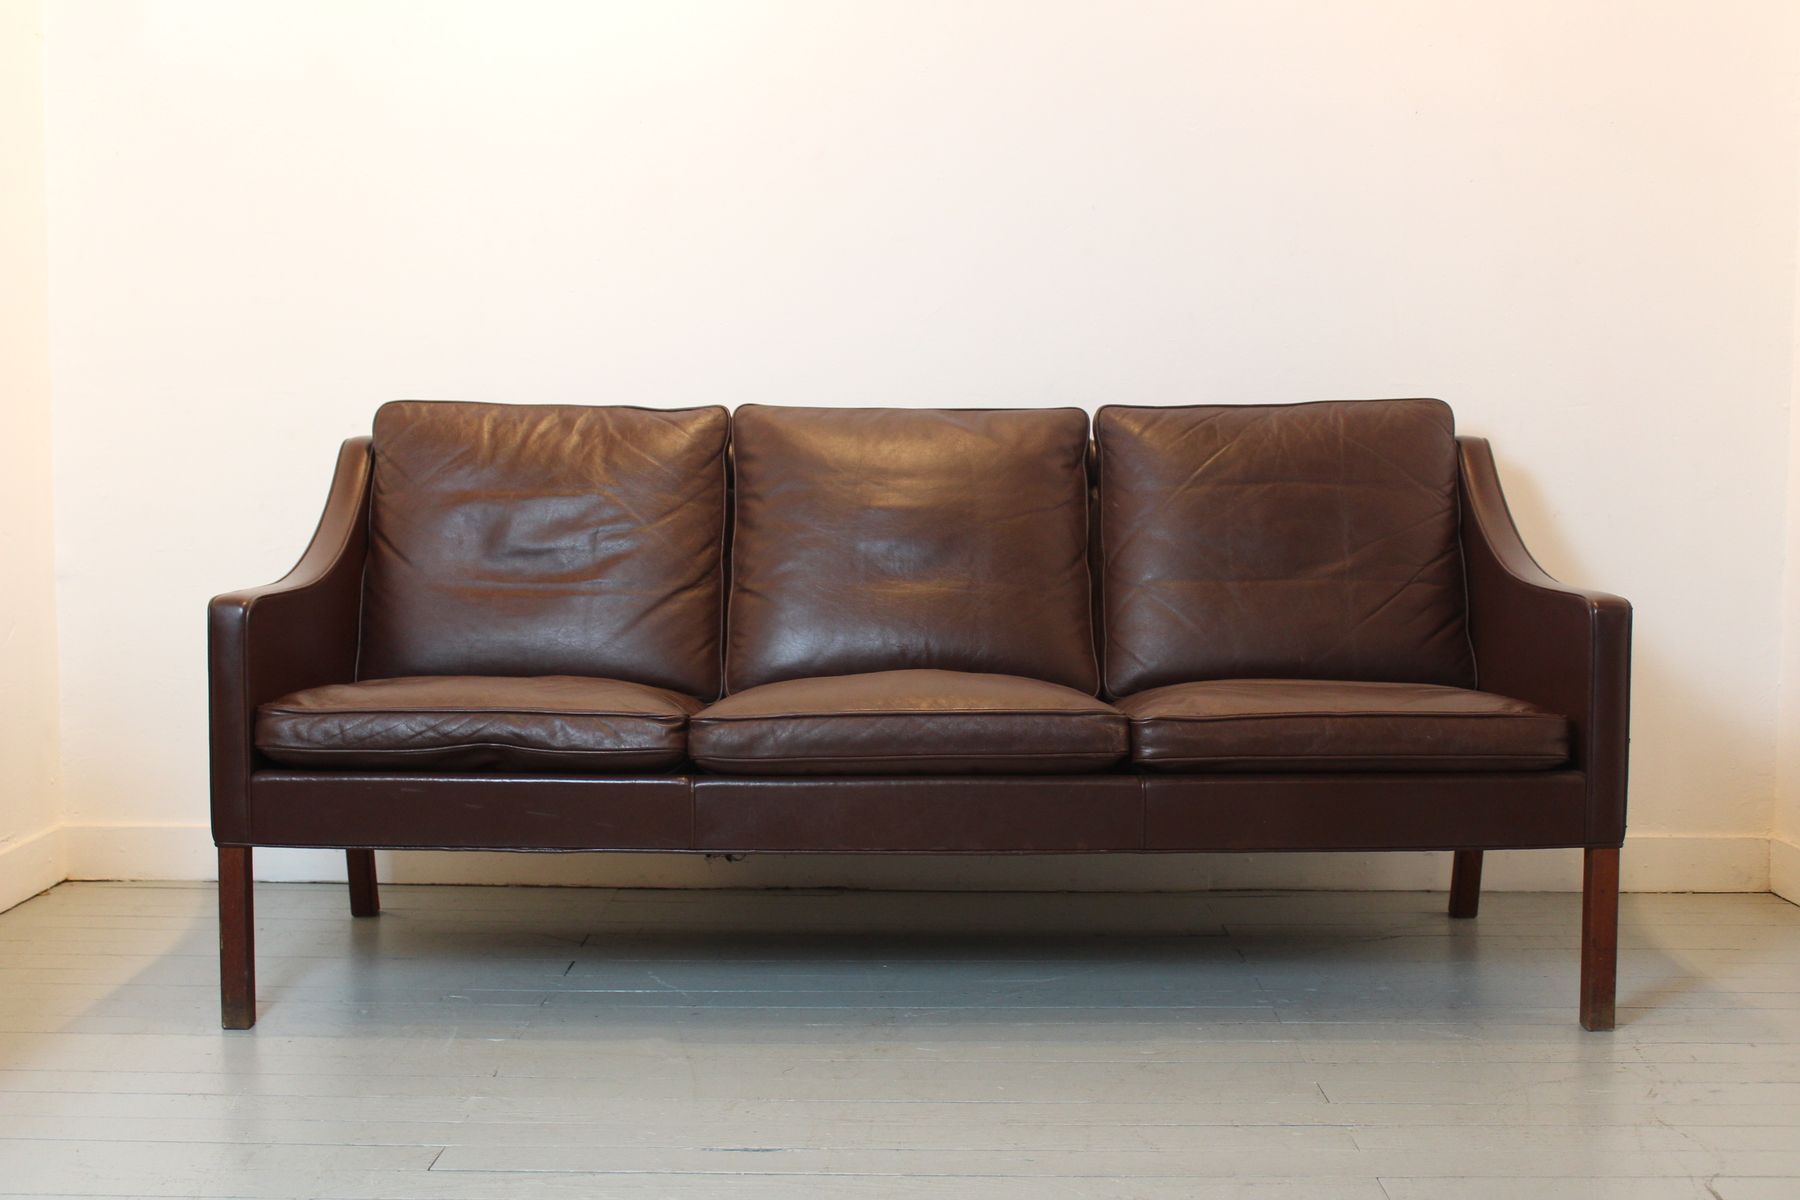 Vintage Leather 3 Seater Sofa by B¸rge Mogensen for Fredericia for